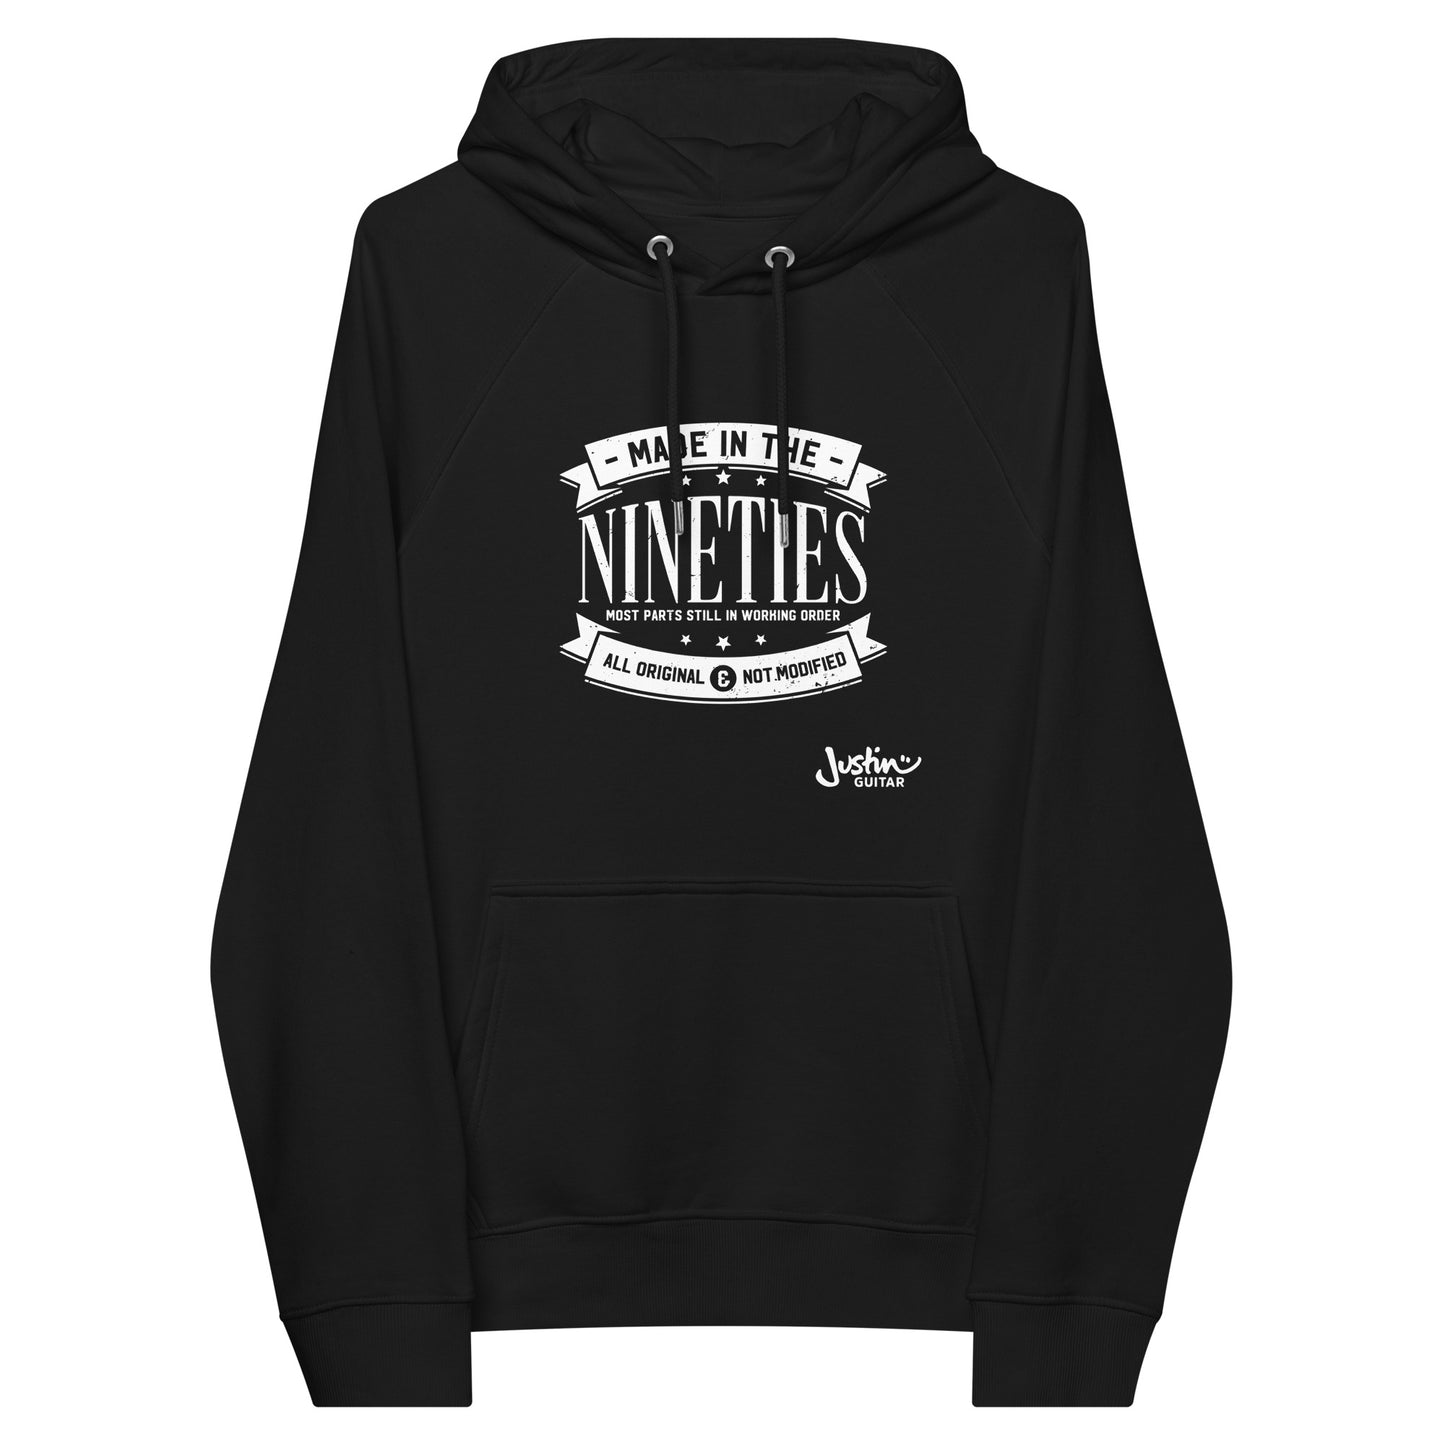 Made In The 90 Guitarist Hoodie